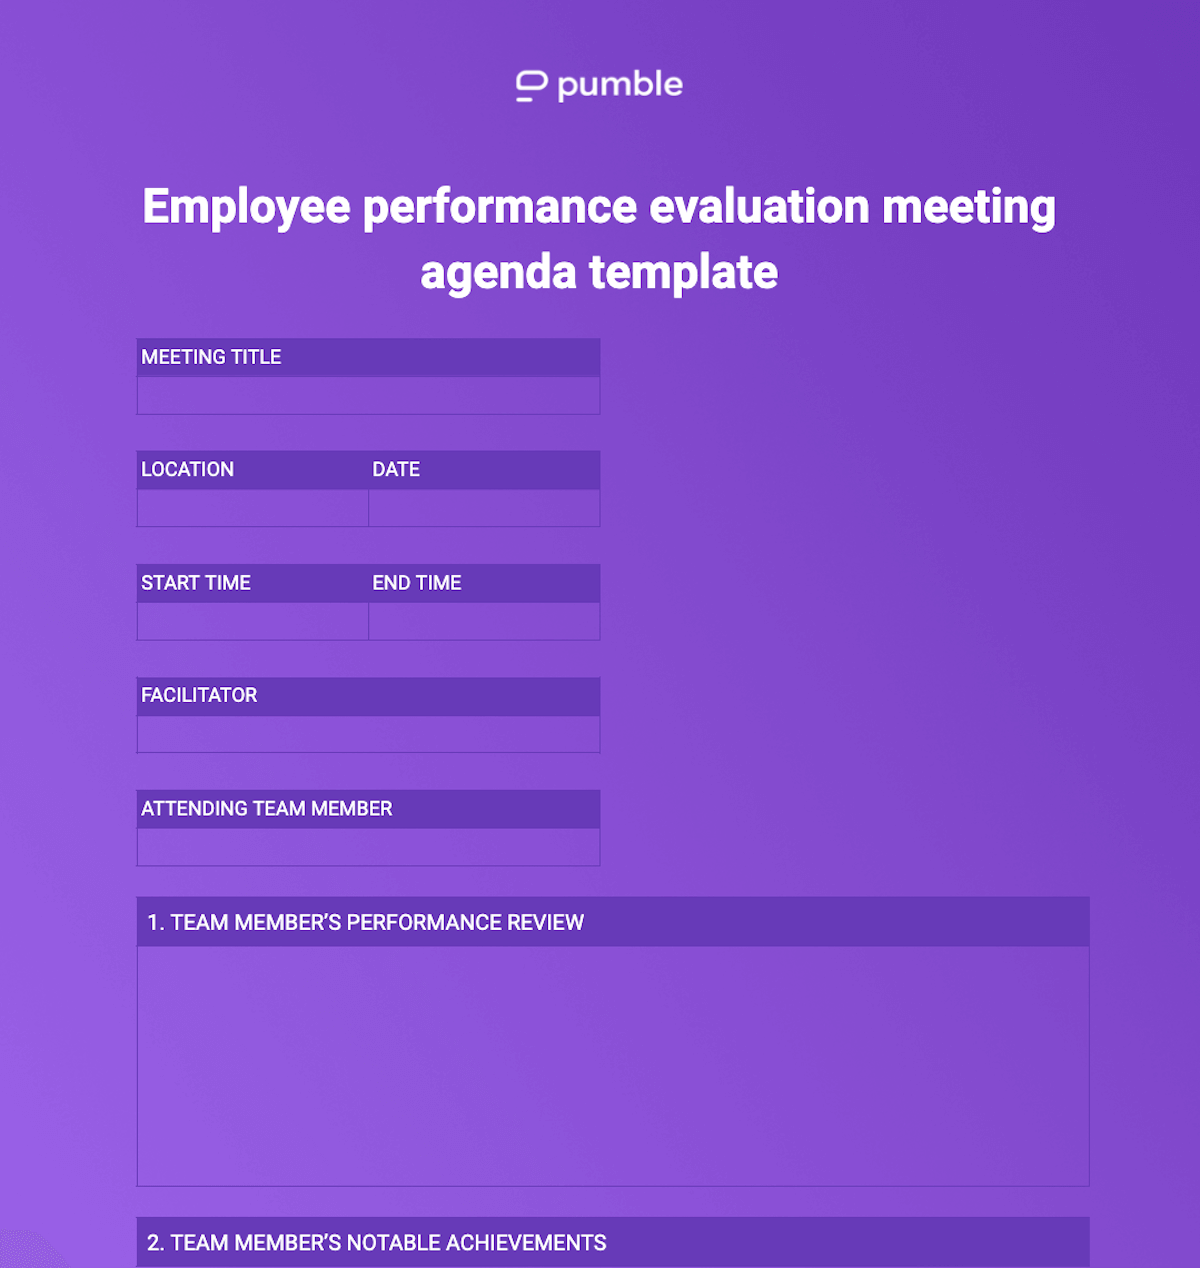 An example of an employee performance evaluation meeting agenda template